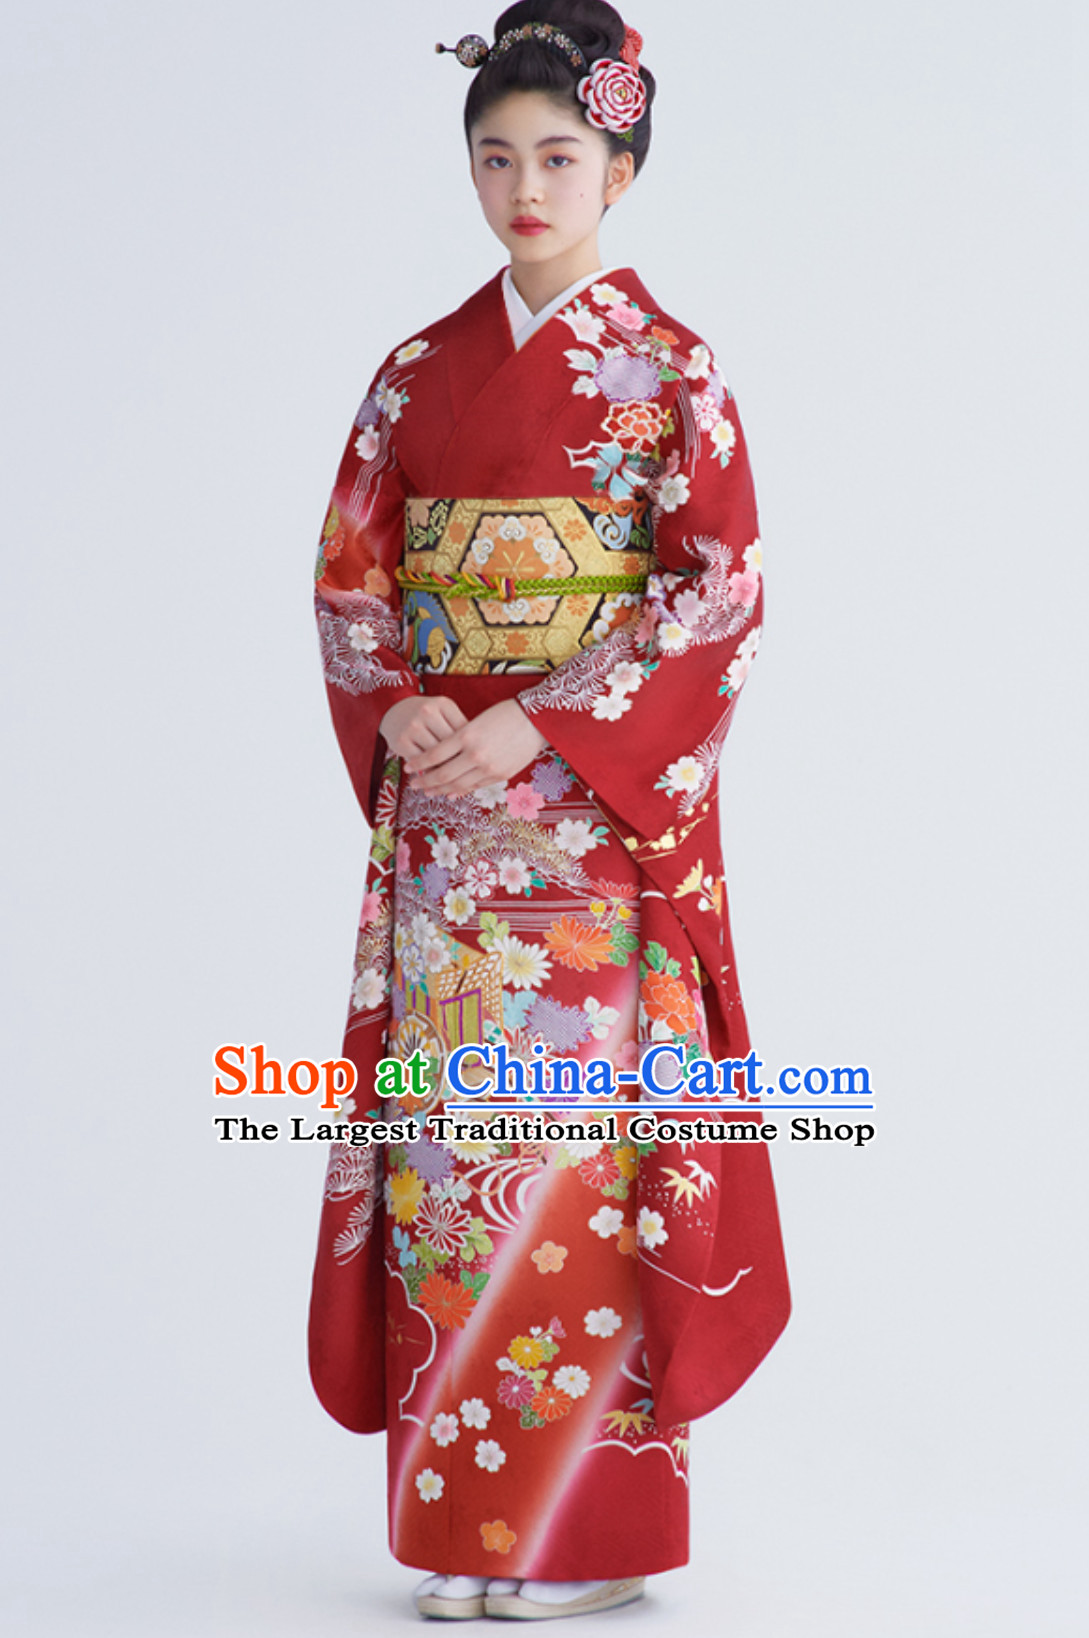 Traditional Asian Japan Clothing Japanese Fashion Apparel Printing Furisode Kimono Costume Complete Set for Women